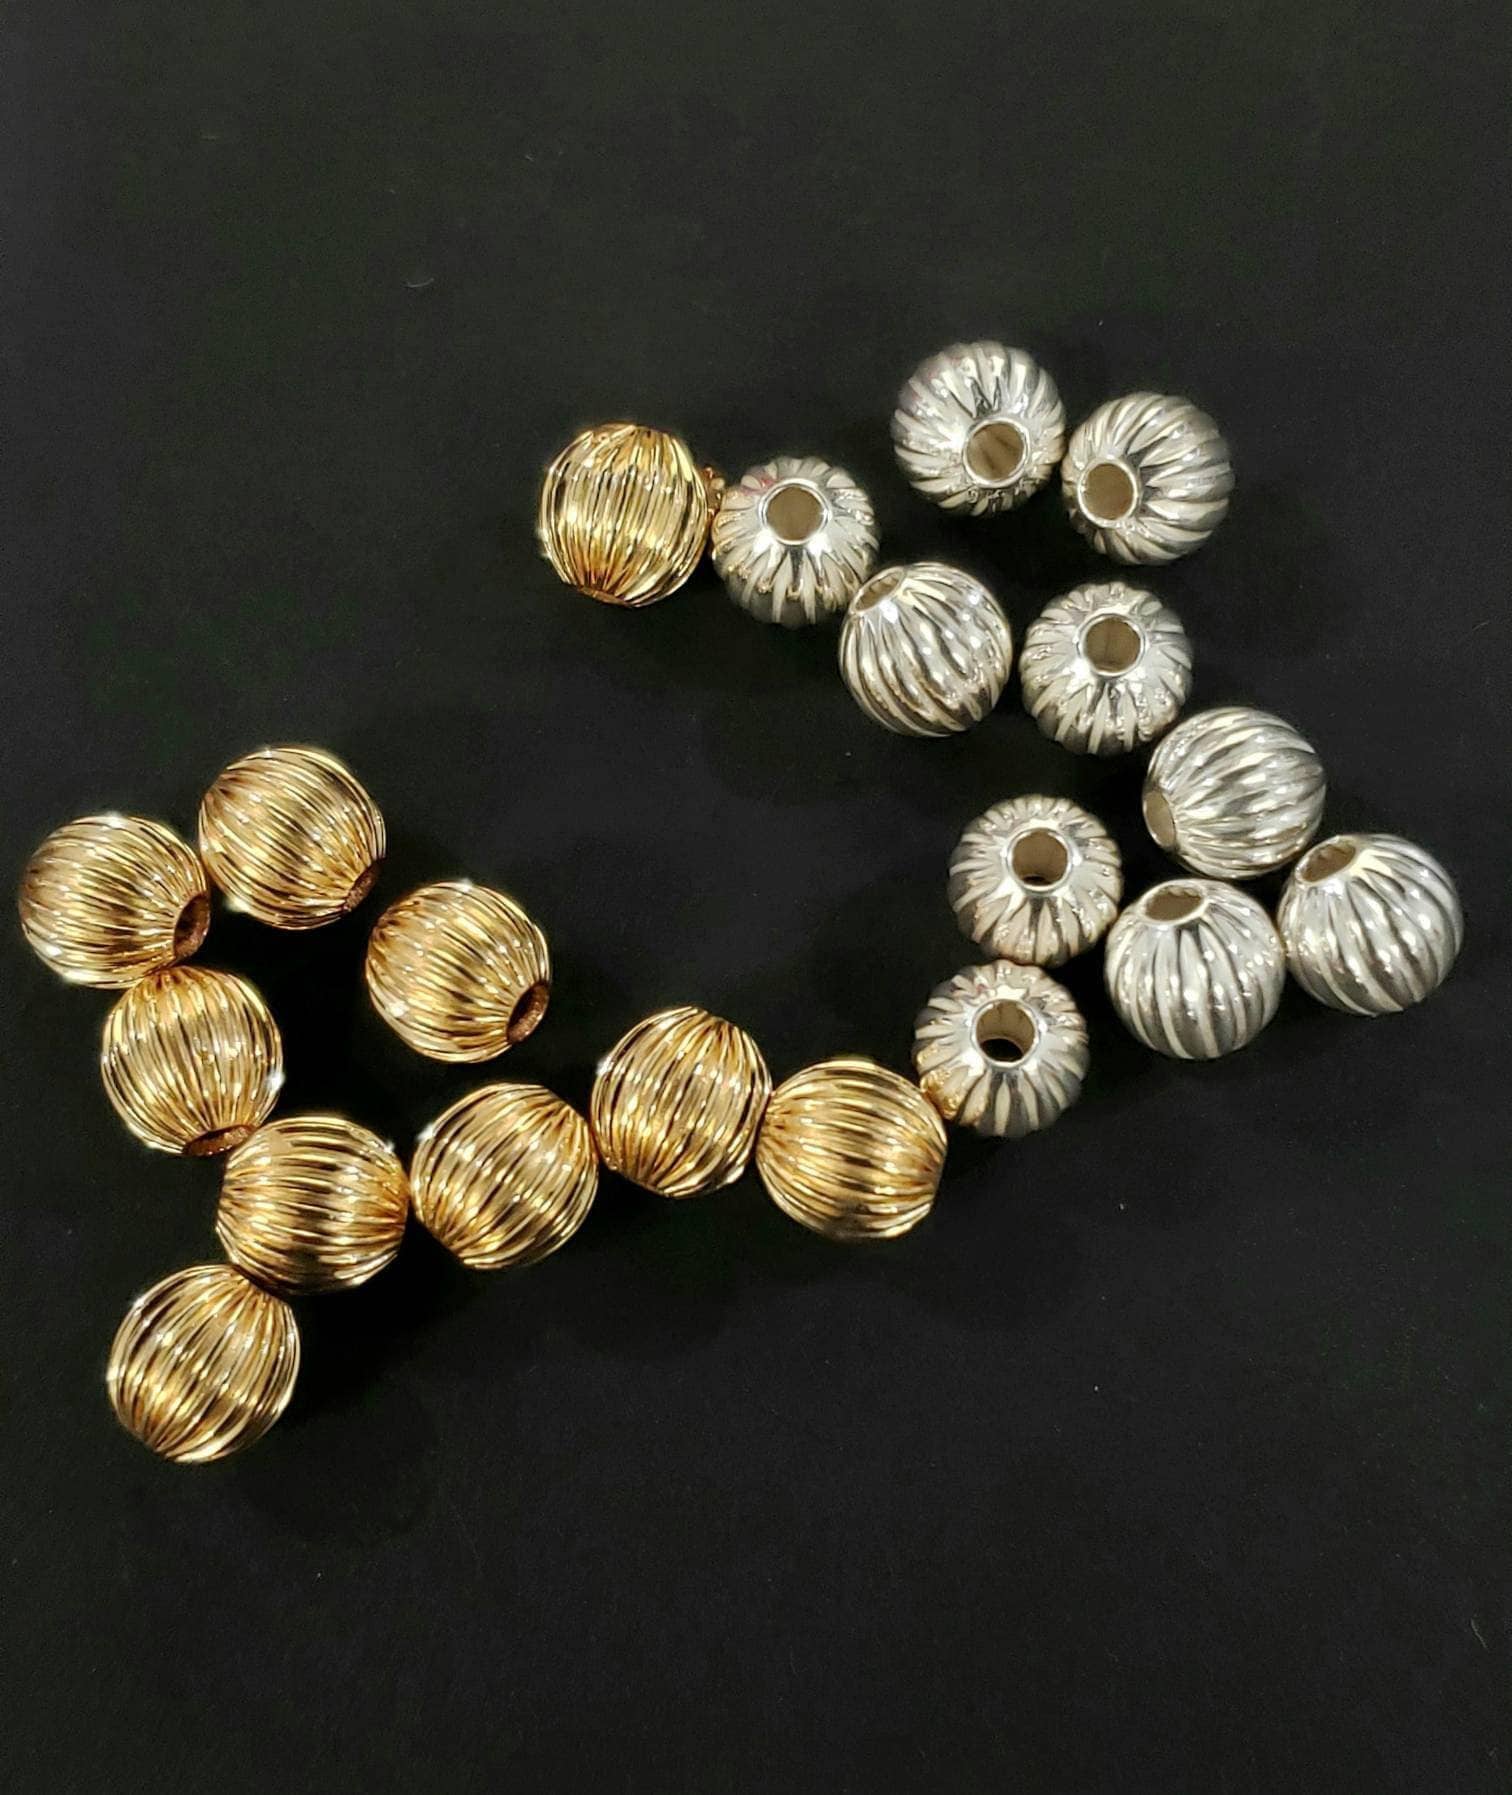 10 pcs 5mm corrugated round Fluted bead 925 sterling silver and 14k gold filled, Made in USA high quality jewelry making spacer bead .